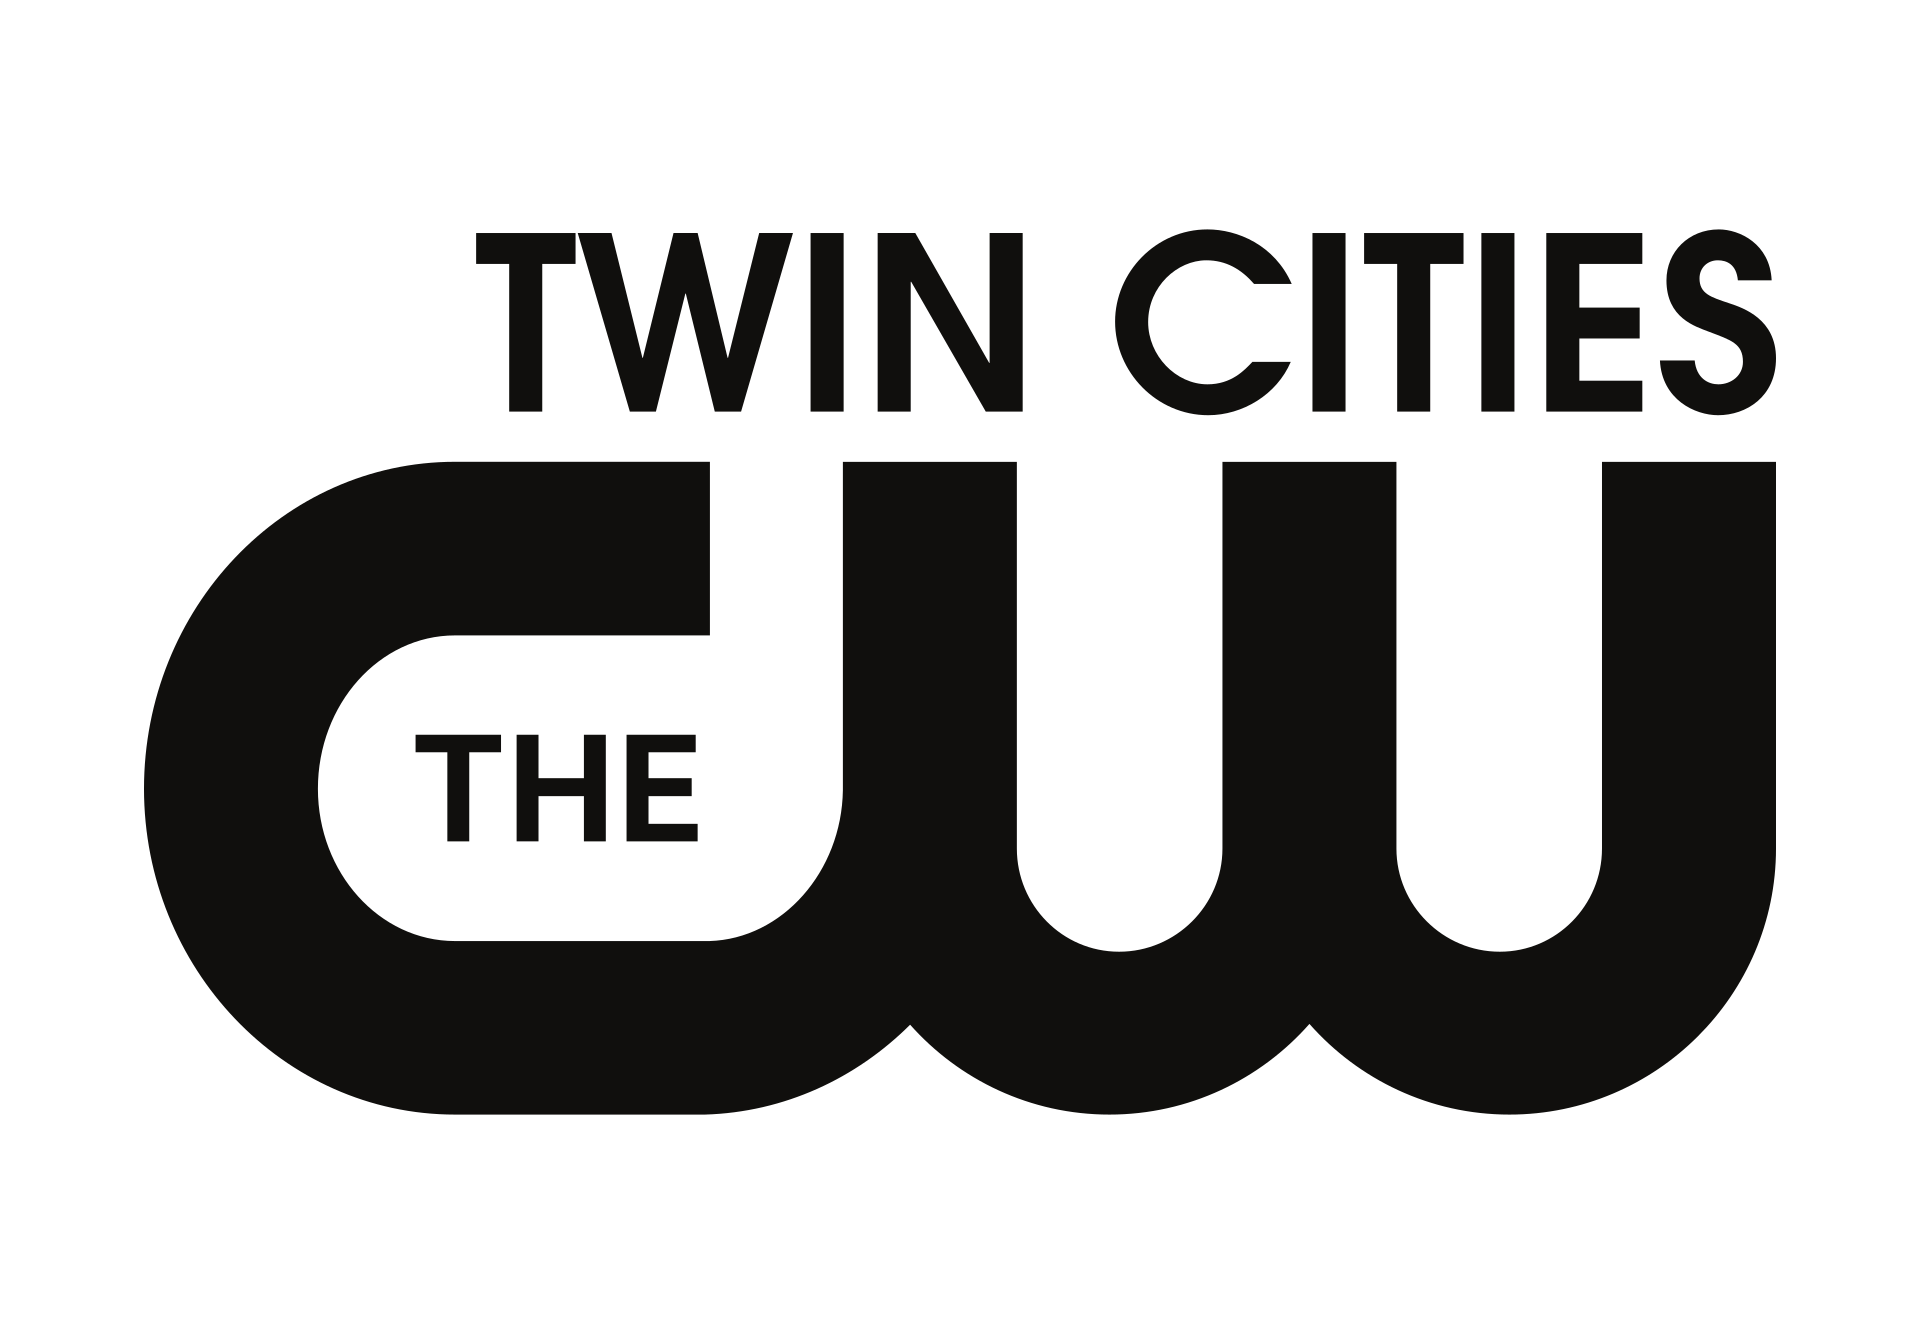 The CW Twin Cities